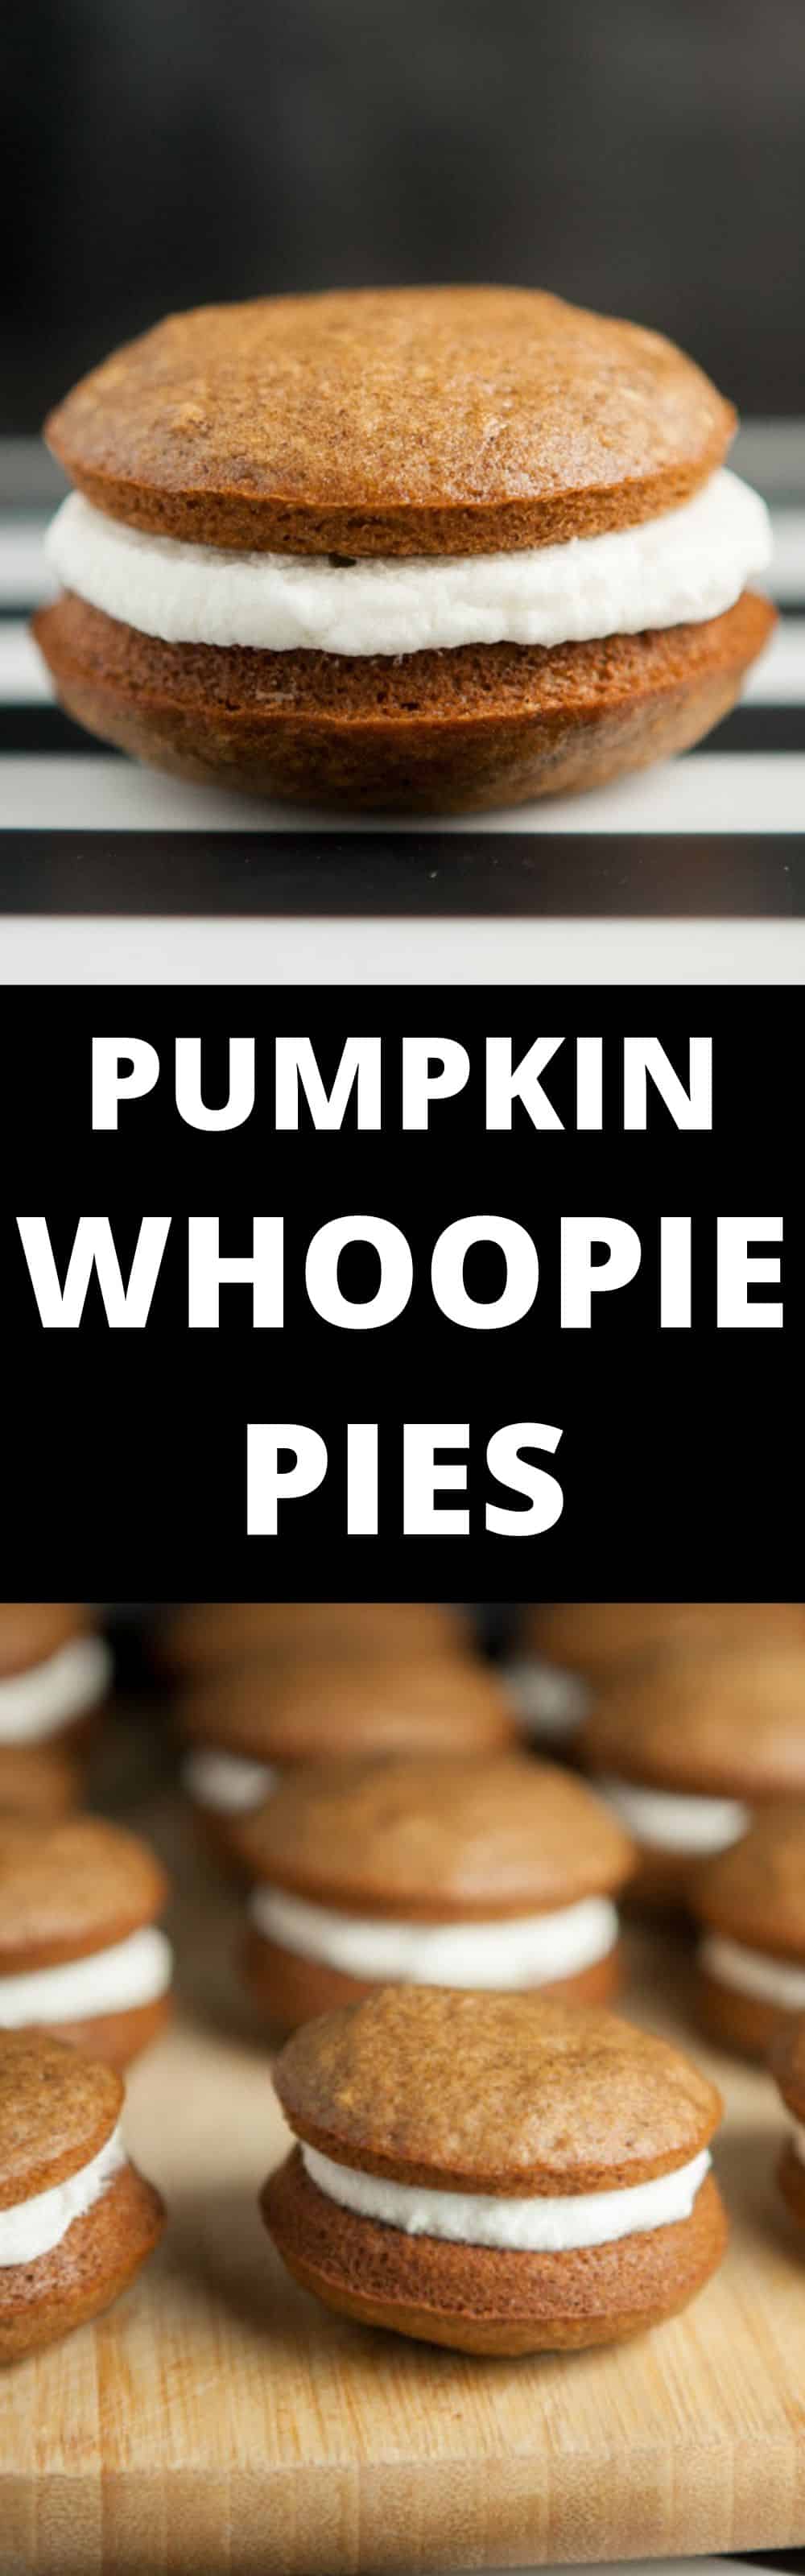 These incredible pumpkin whoopie pies are made with two soft and fluffy pumpkin cake-like cookies and a layer of marshmallow filling sandwiched in between. It’s a fun and perfect little treat you can eat right out of your hands.